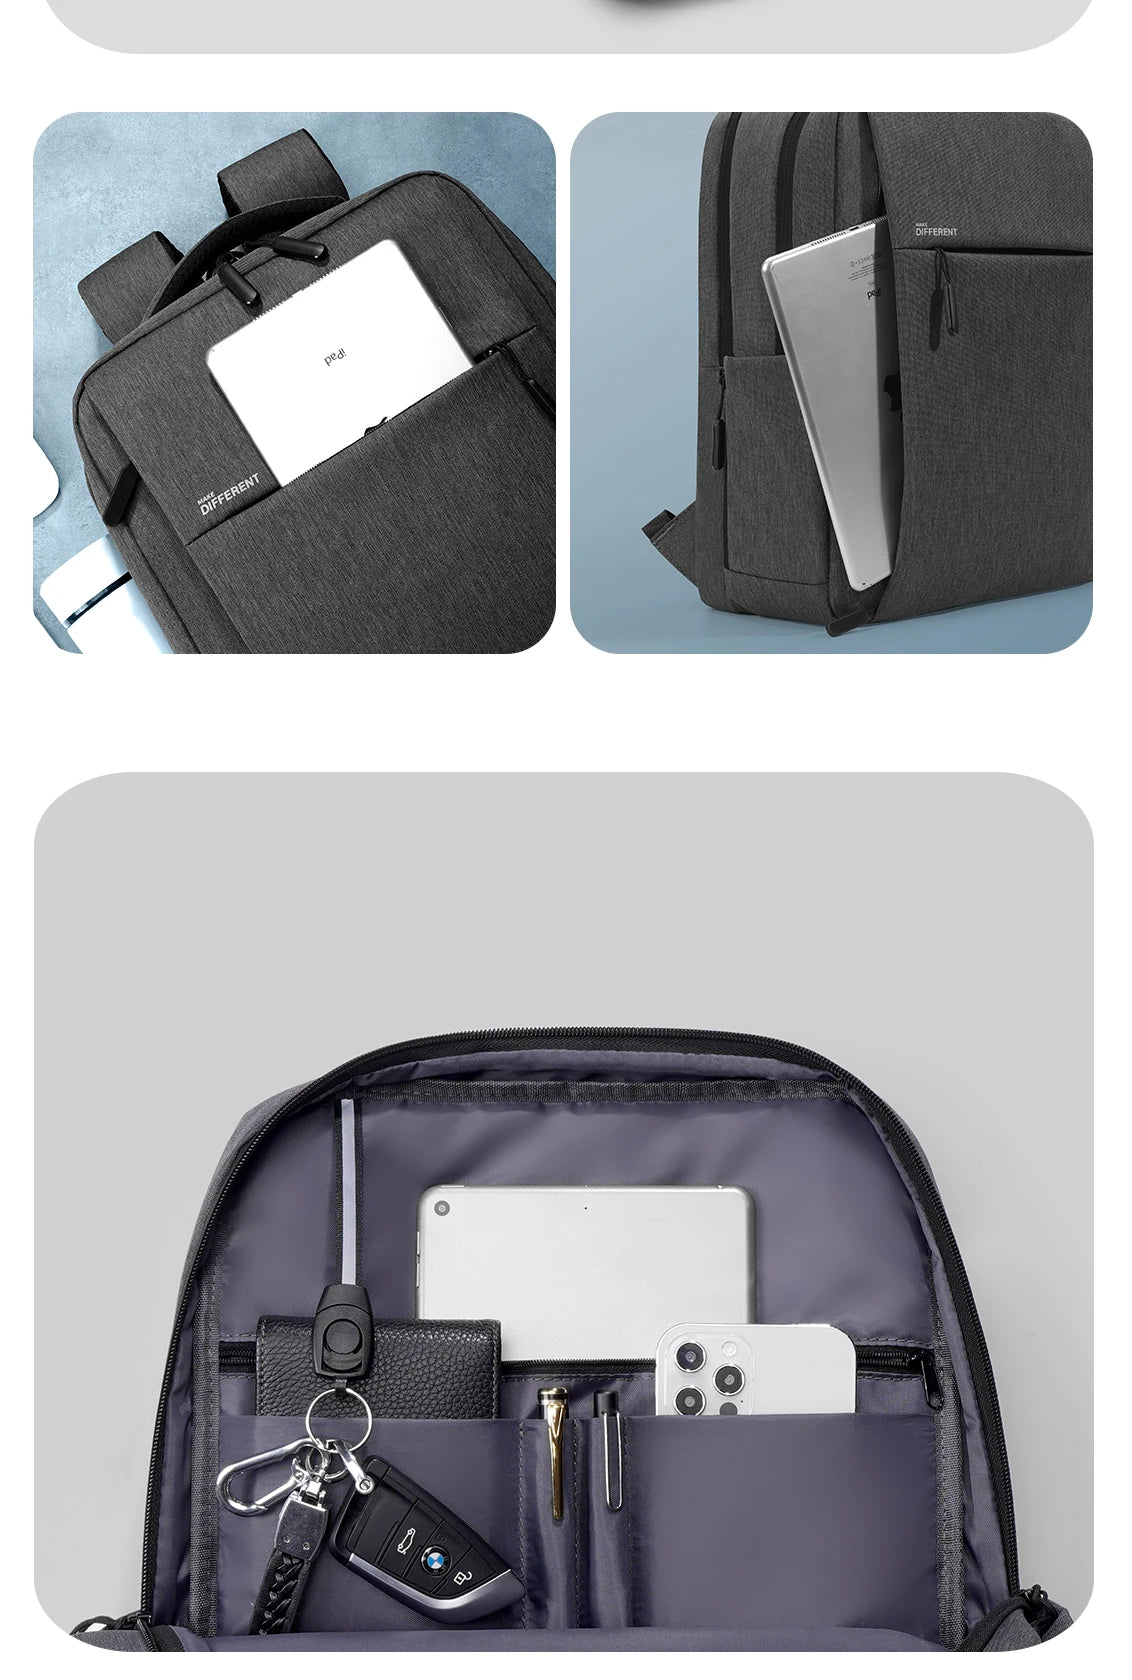 Versatile Laptop Backpack for School and Travel